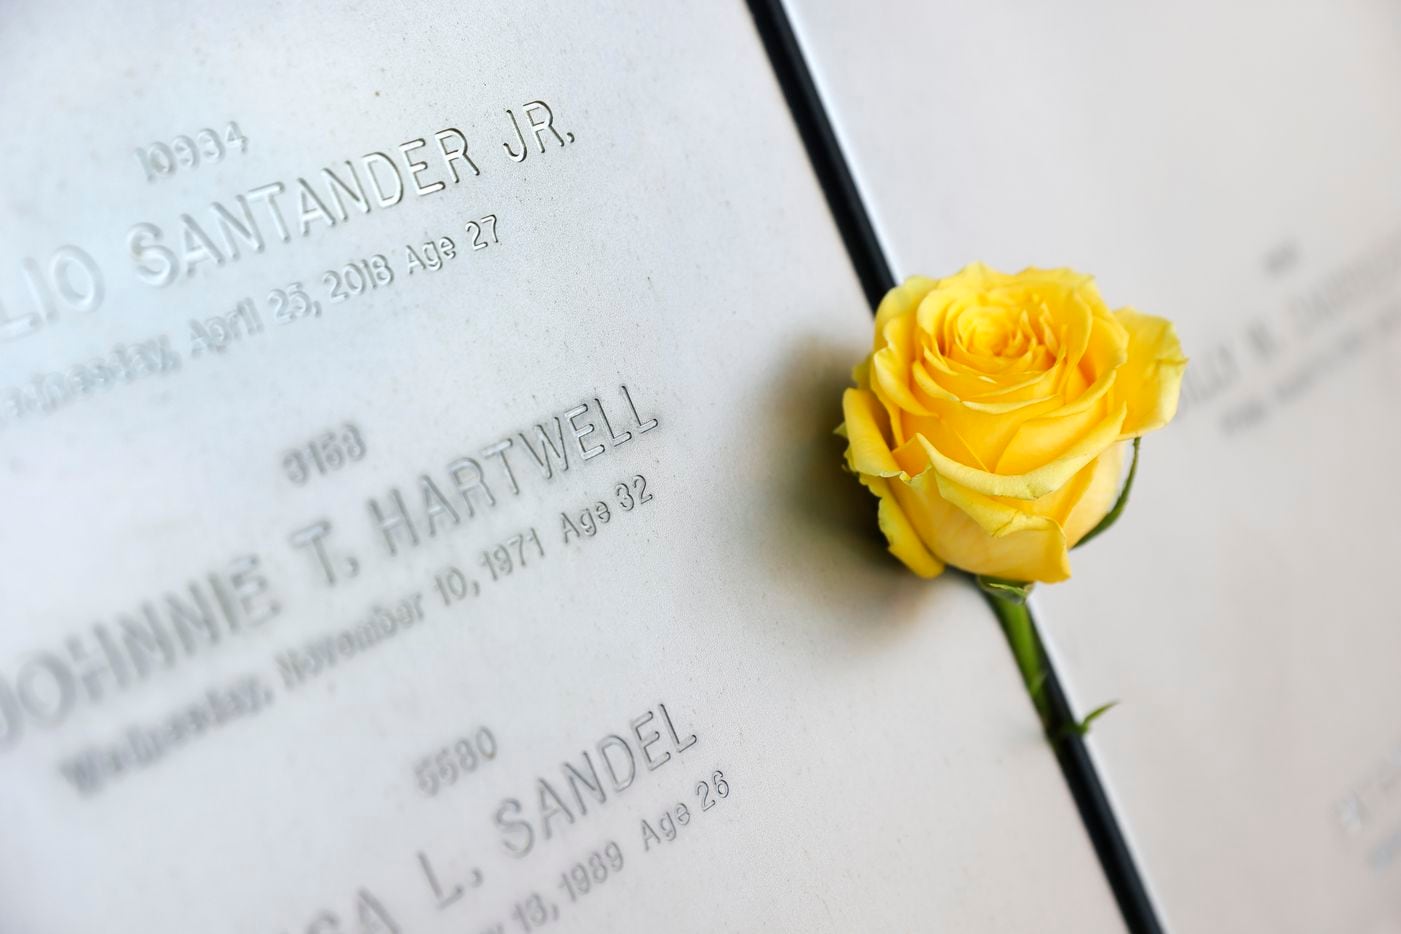 Dallas Police officer Rogelio Santander Jr was remembered with a yellow rose during the 2021 Police Memorial Day at the Dallas Police Memorial in downtown Dallas, Wednesday, July 7, 2021. Santander was gunned down in a Dallas Home Depot by a shoplifter in 2018. (Tom Fox/The Dallas Morning News)